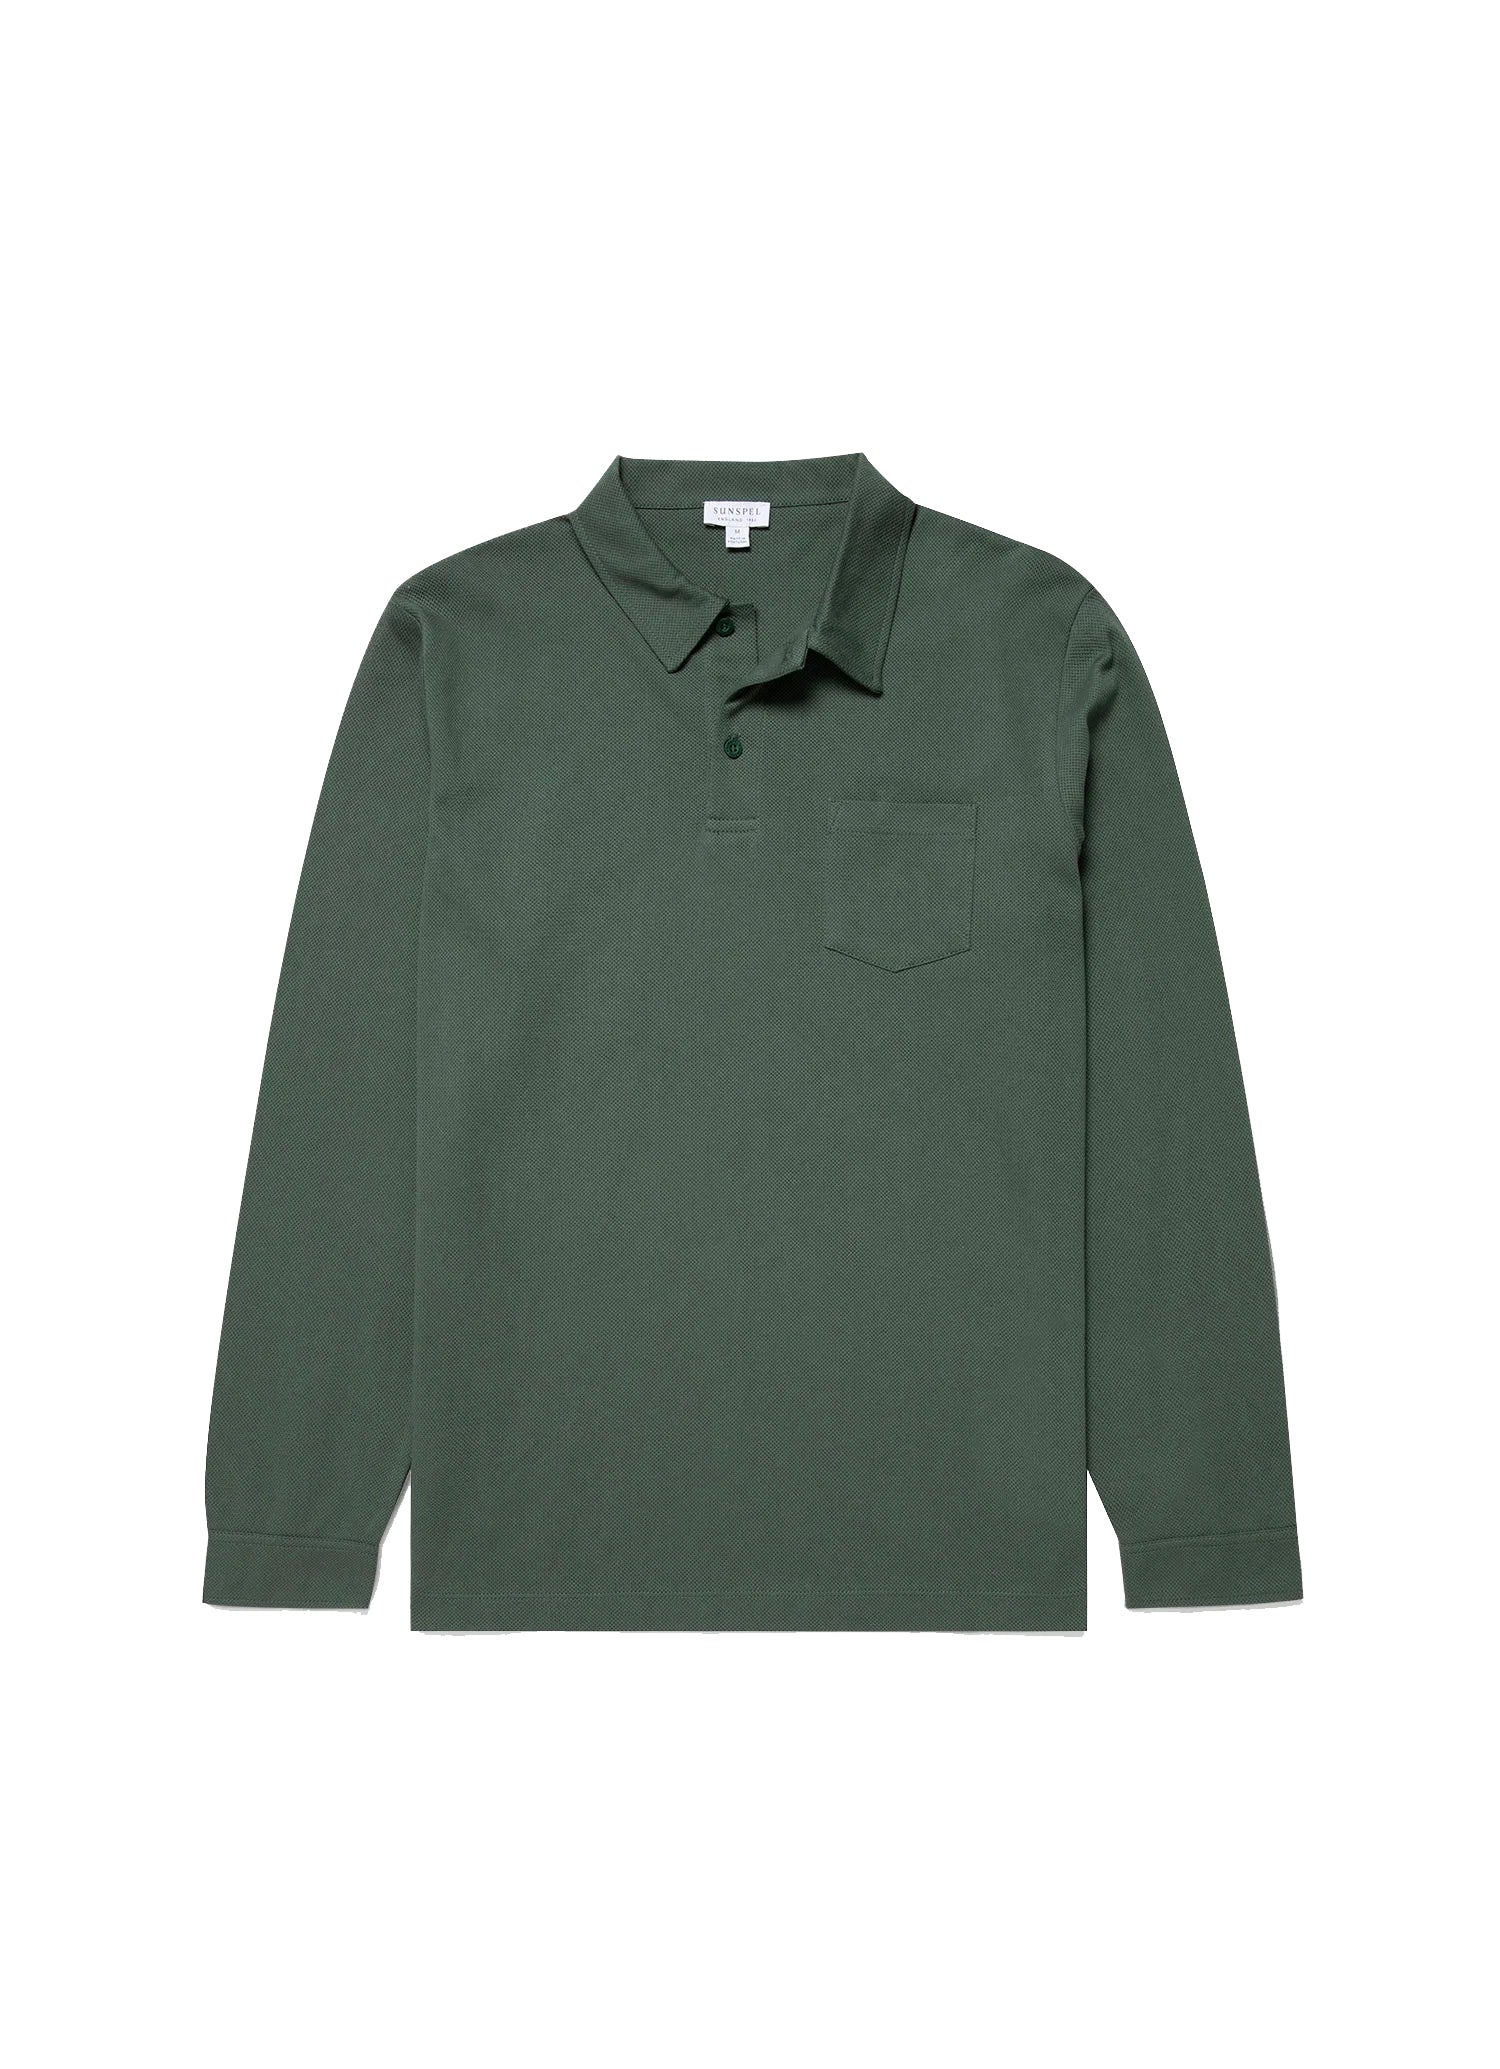 Long Sleeve Riviera Polo DARK GREEN
A long sleeve take on the Riviera polo shirt, a garment tailored for Daniel Craig for his role as James Bond in Casino Royale. Crafted from the same fine cotton mesh fabric, the polo offers a precise cut, patch pocket and full length, cuffed arms. A versatile garment that can be worn year-round.

100% Cotton
Wash at 30°C
Do not tumble dry
Dry cleanable
Designed in England and made in Portugal
 SUNSPEL